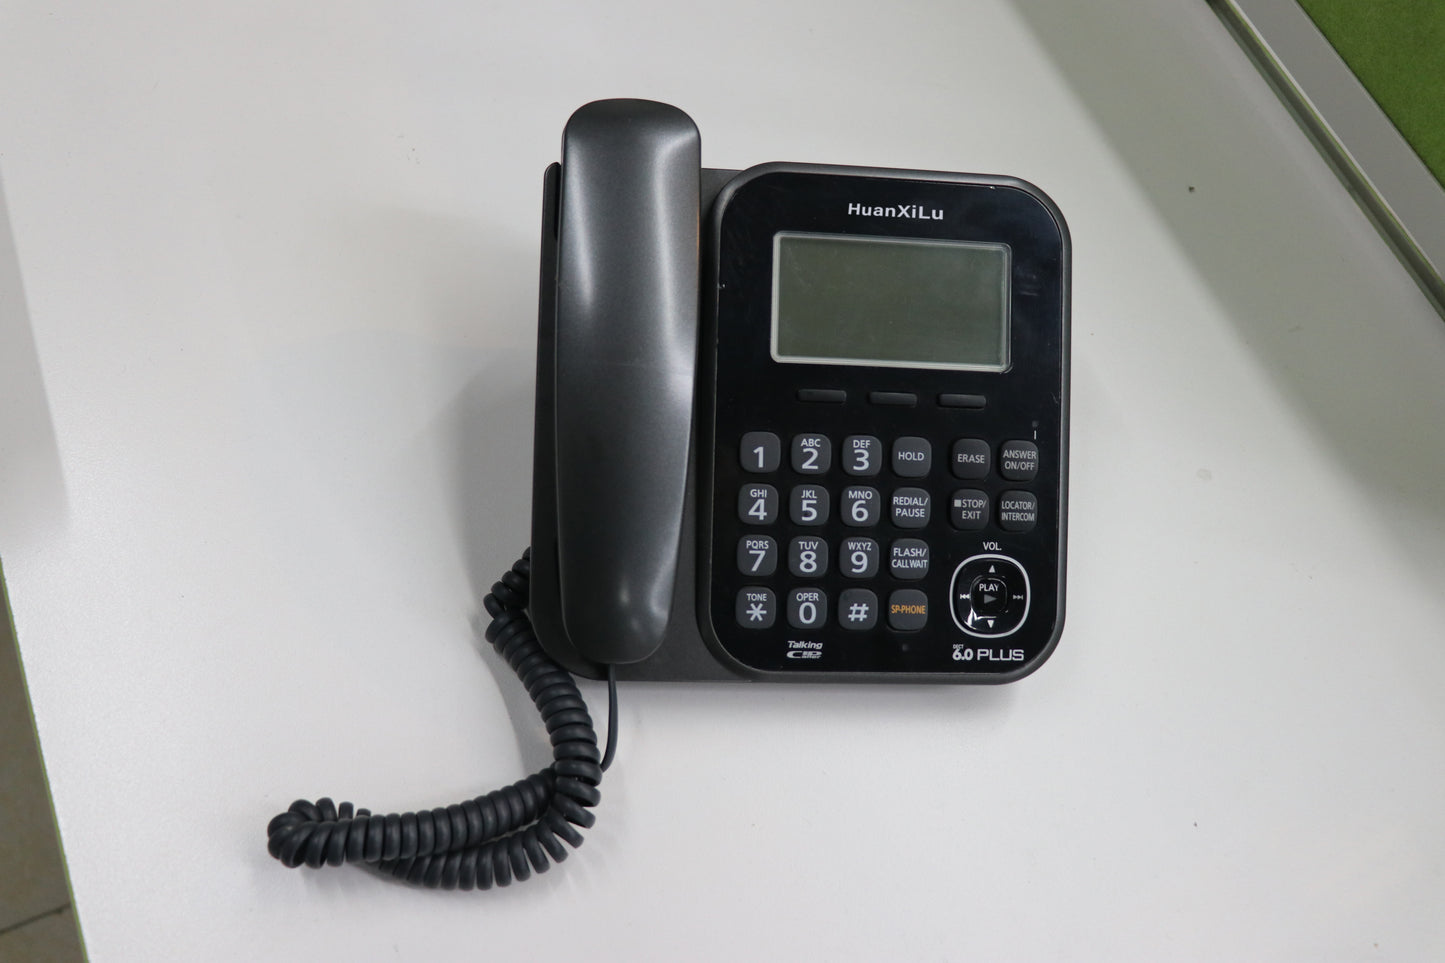 HuanXiLu Standard Phone with Answering System and Backlit Display